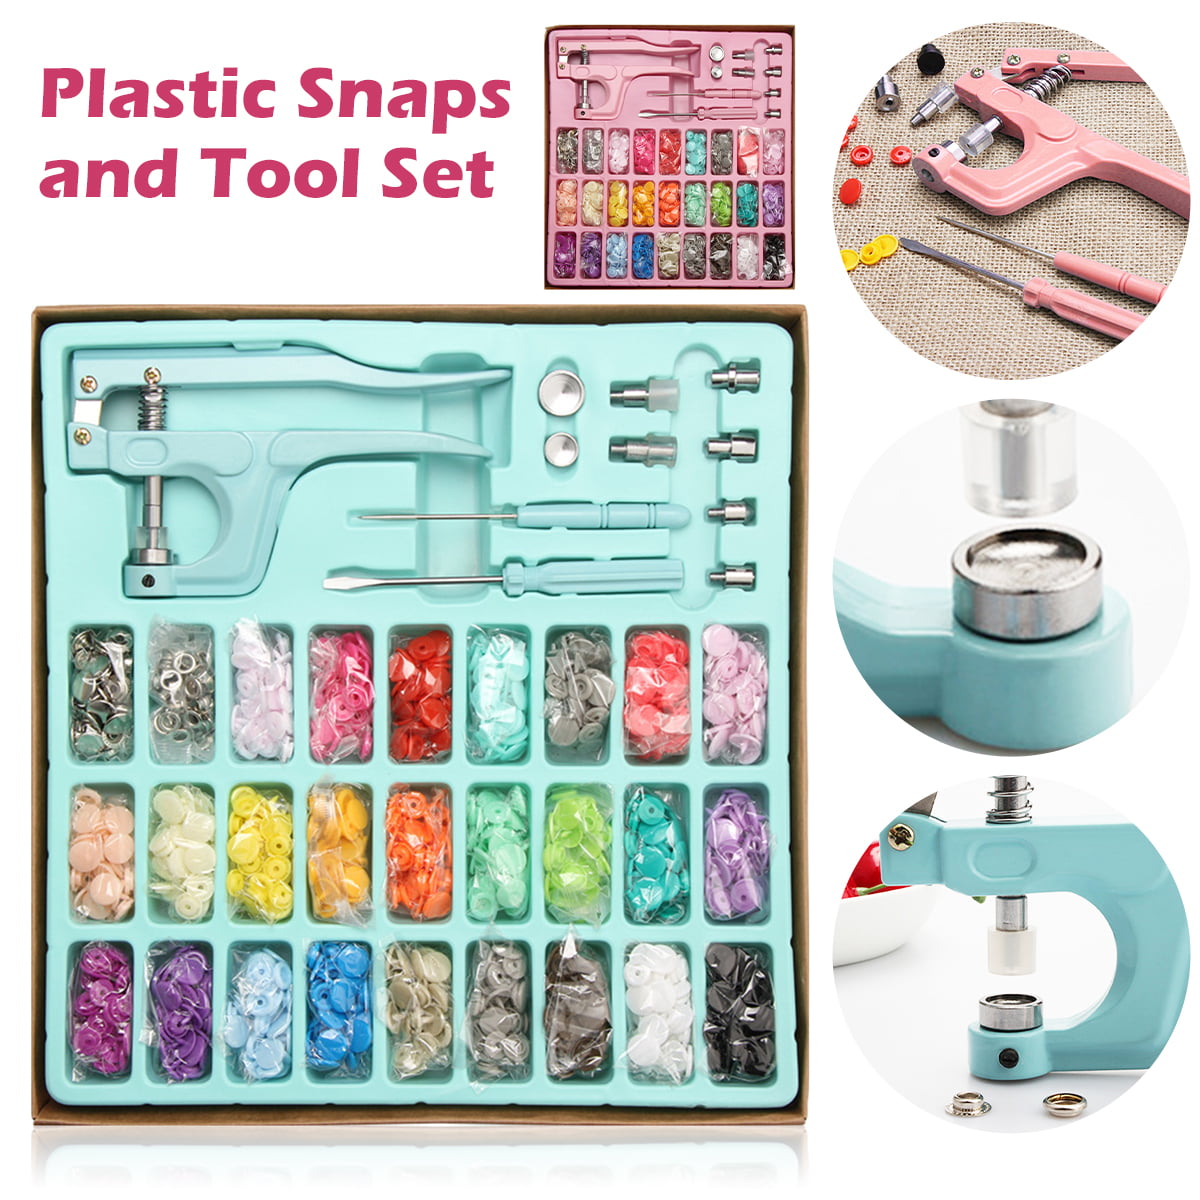 ATopoler 300 Pcs Snap Fasteners Kit with Pliers 5 Shapes 25 Colors Resin  Snaps and Tool Set for Clothing Bag Hat Sewing